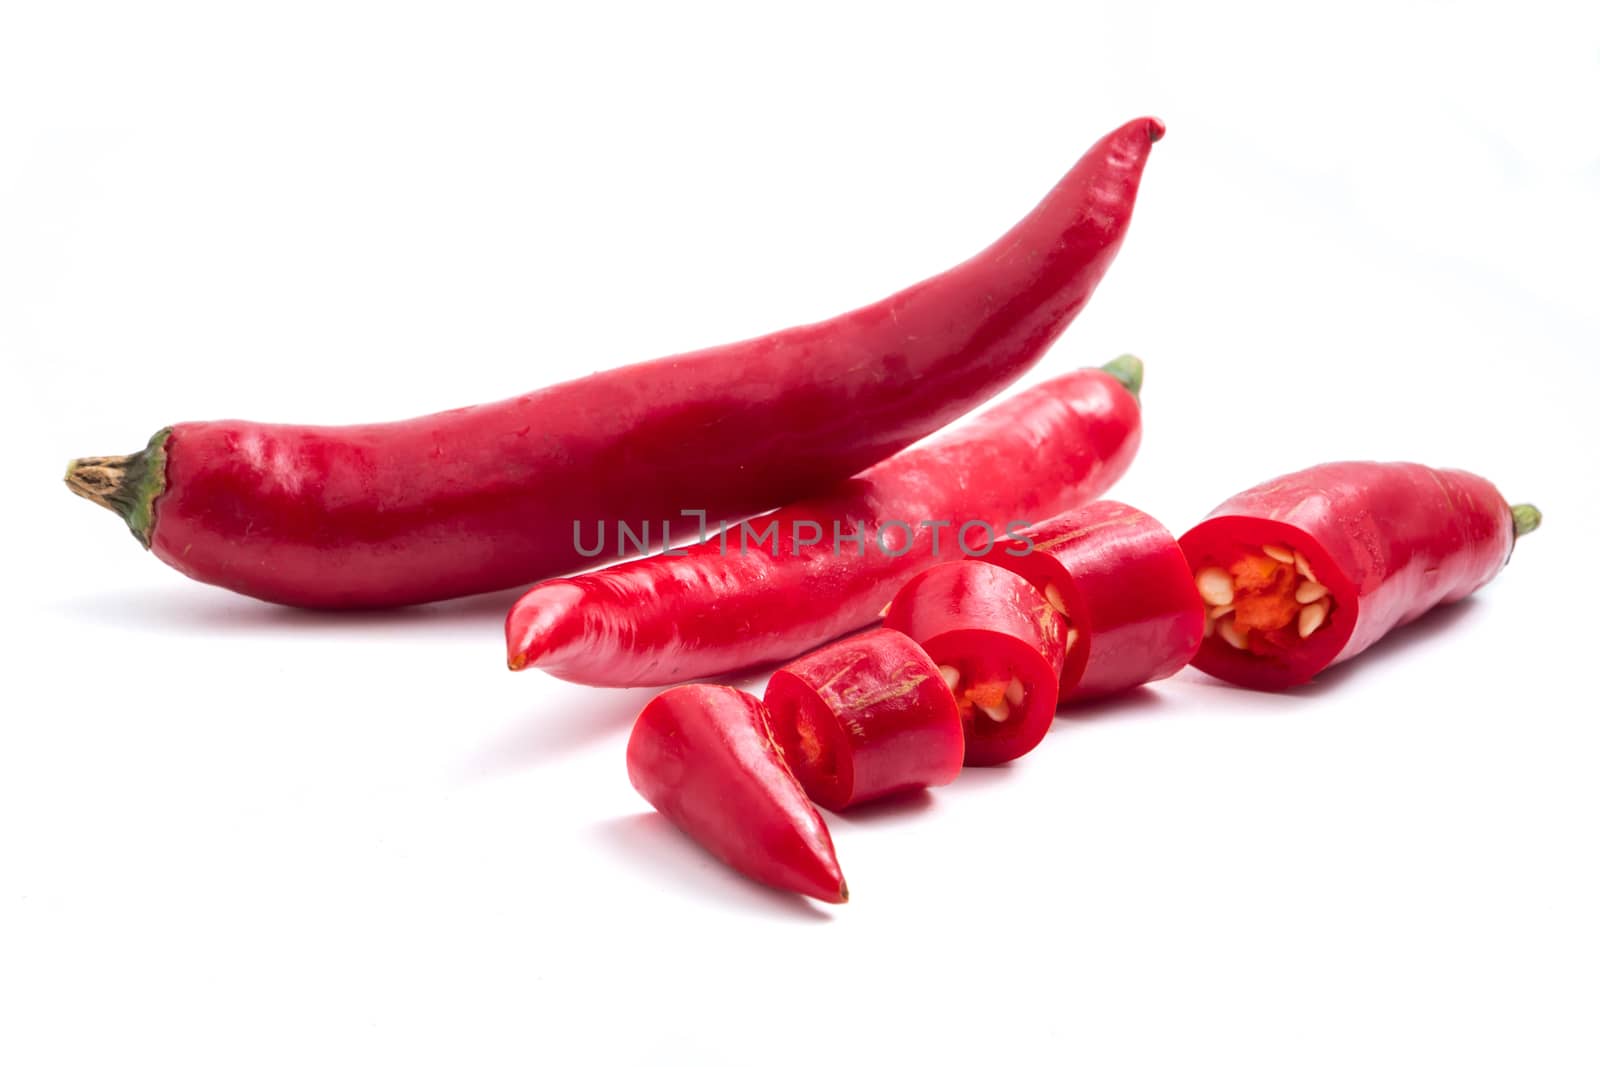 Fresh Red chili papper on white background.